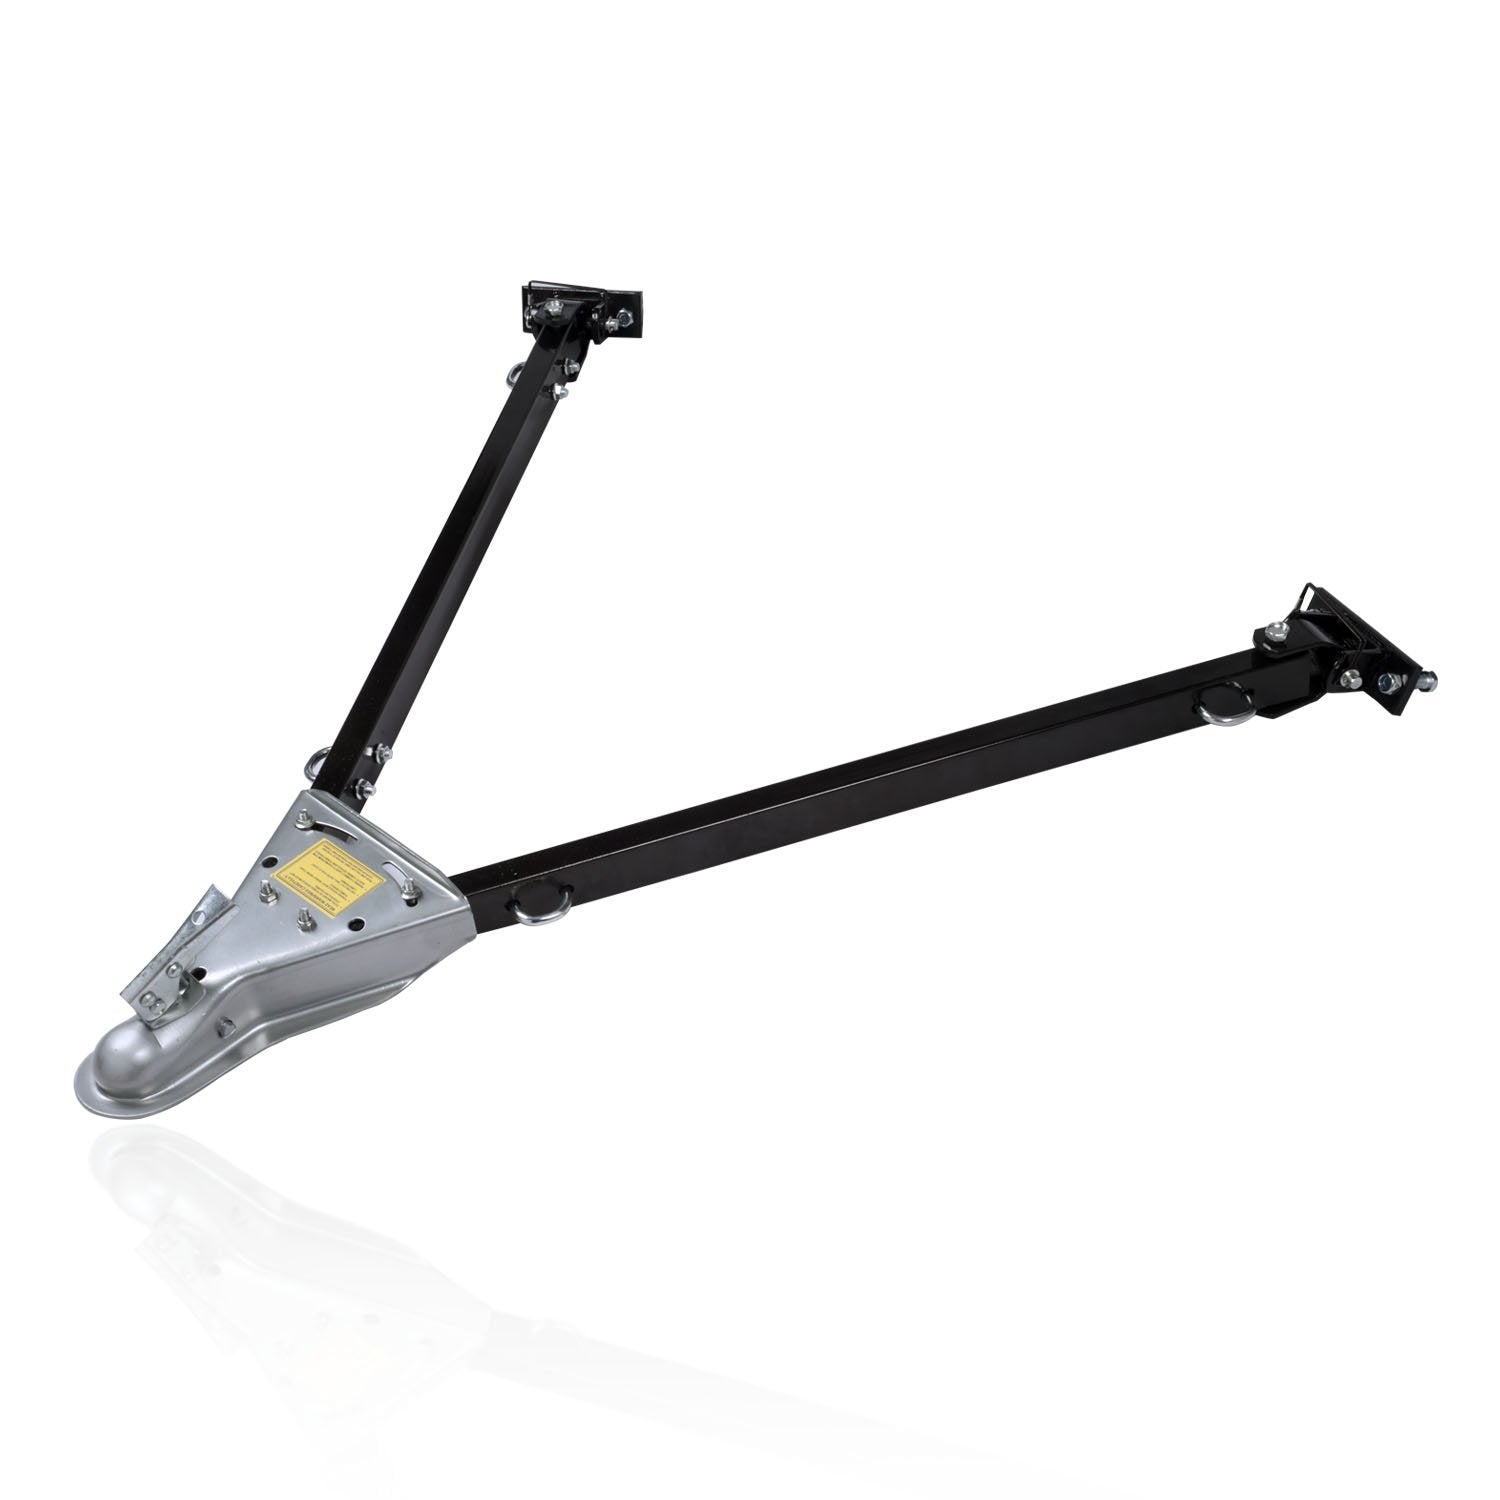 Adjustable Universal Tow Bar, 5000 Lb Capacity | Includes Safety Chains